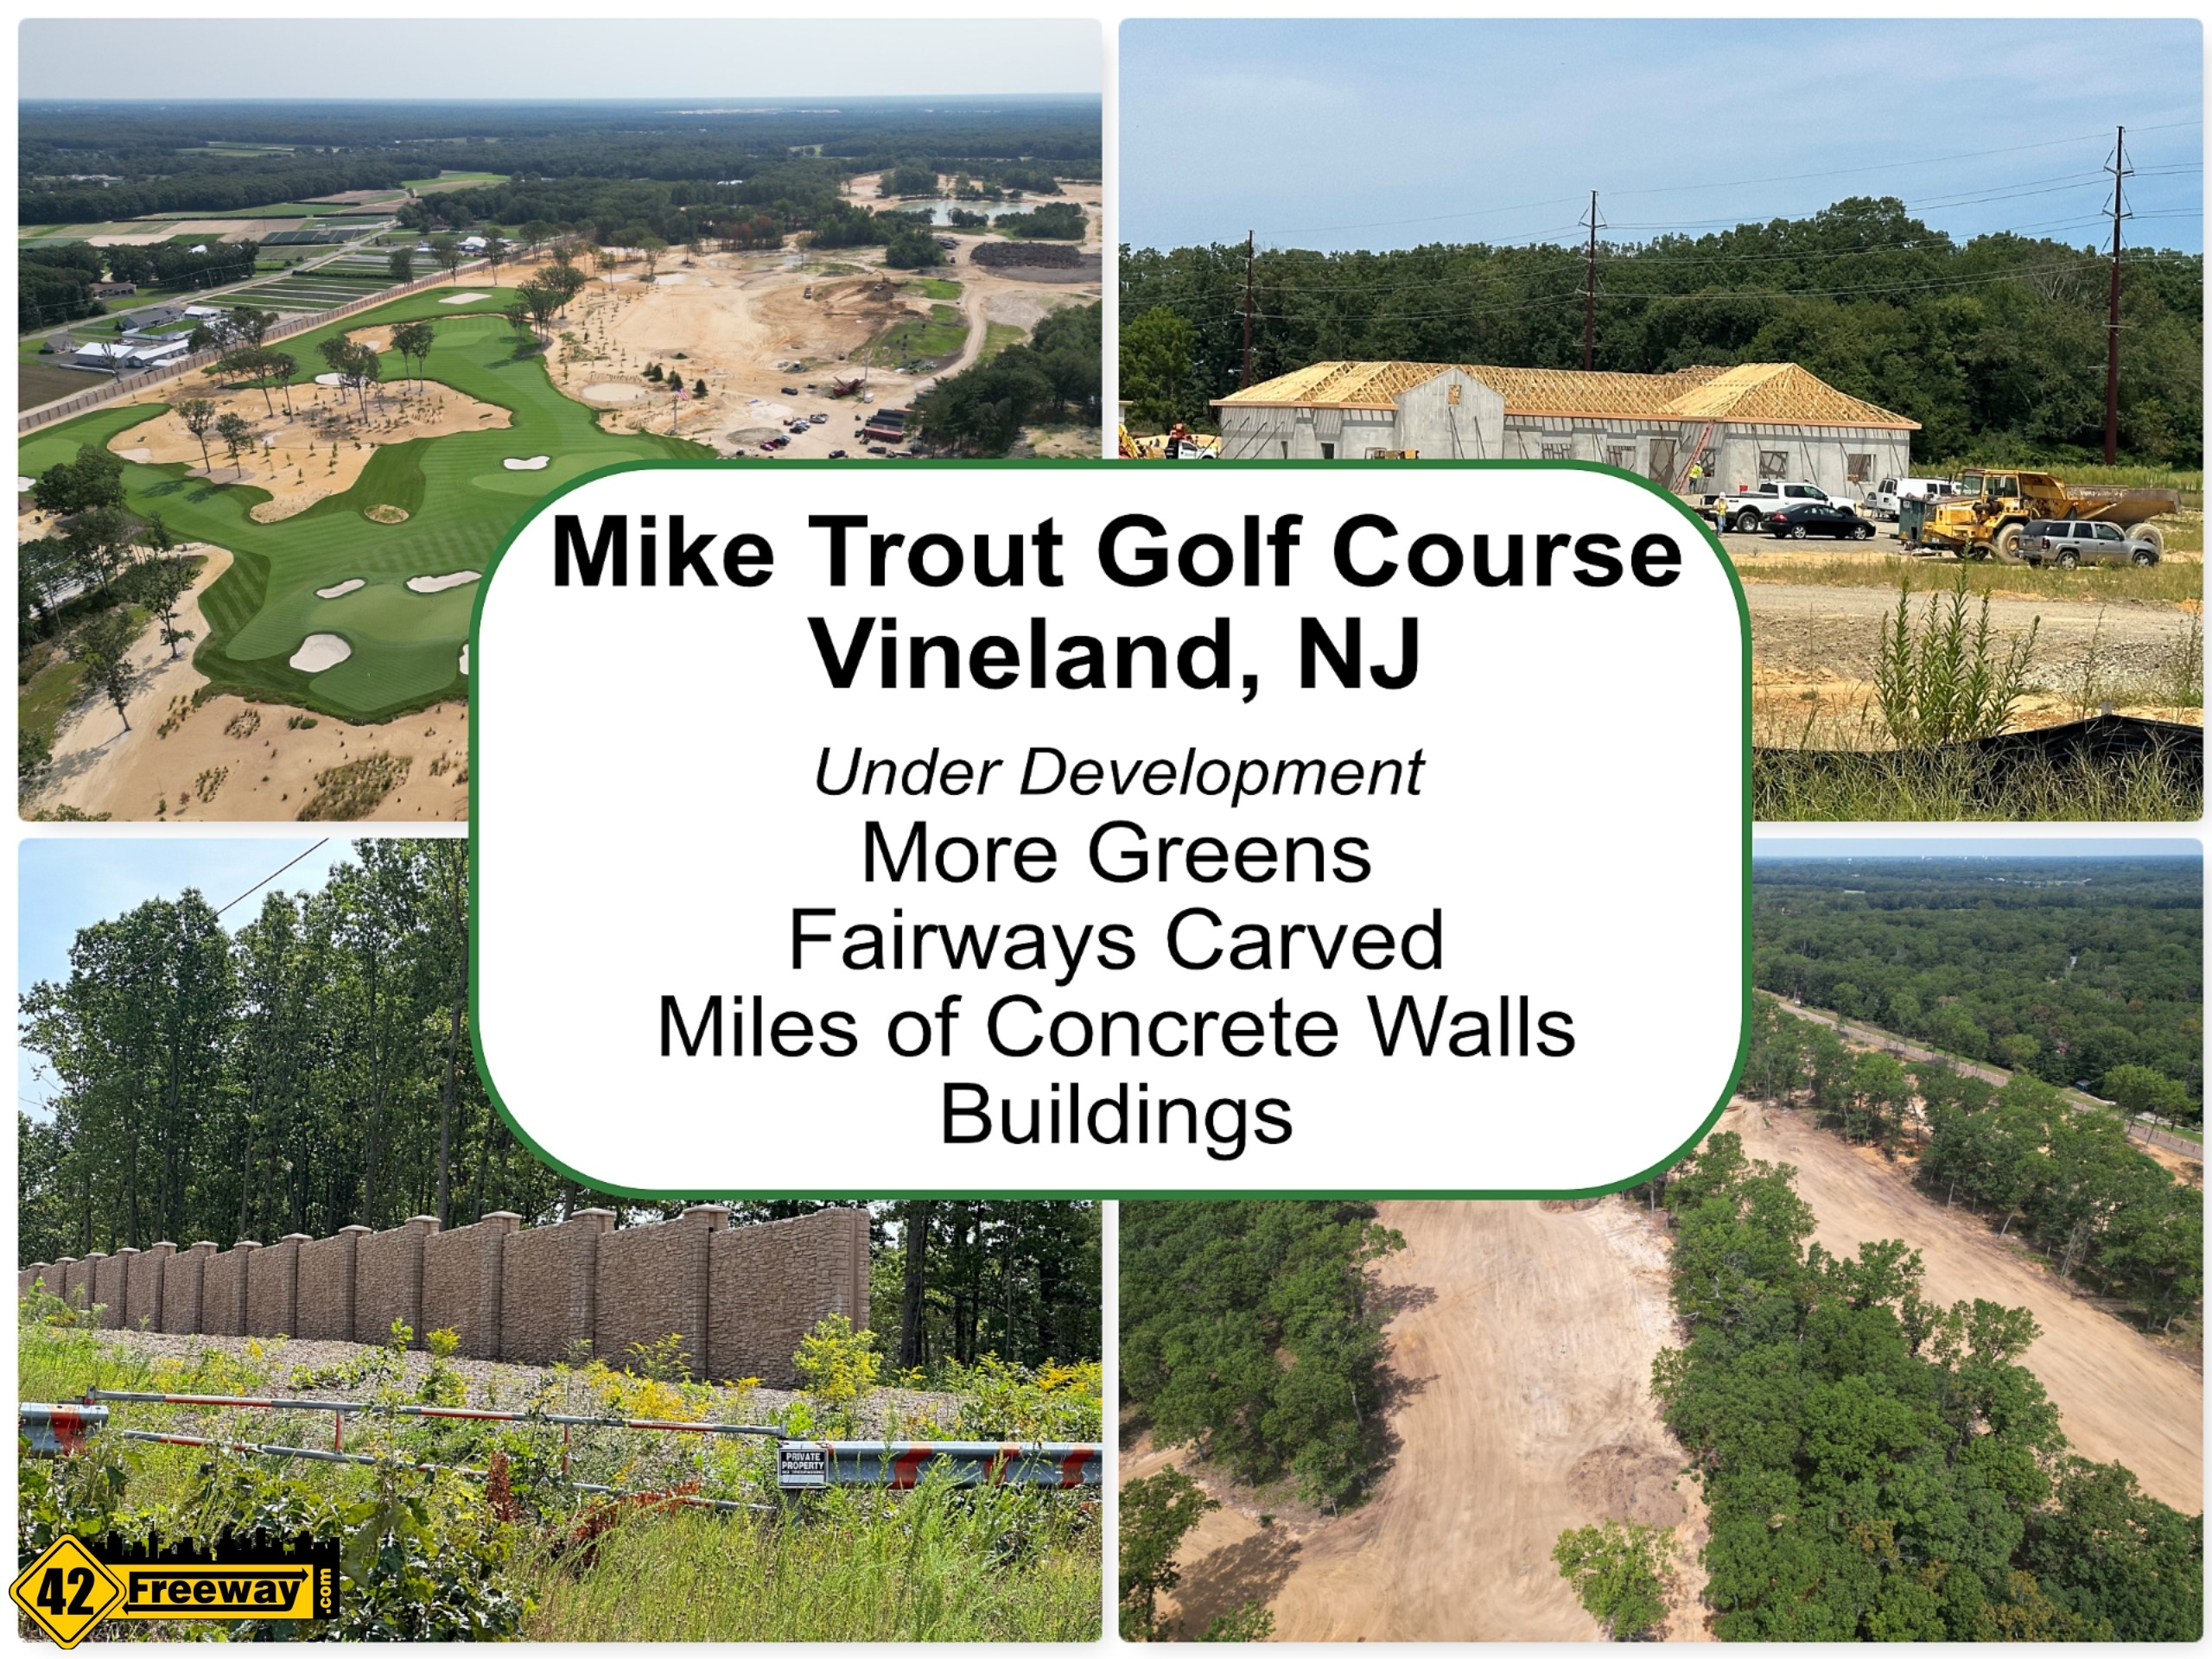 Mike Trout Vineland Golf Course Update; Full Property, Fairway